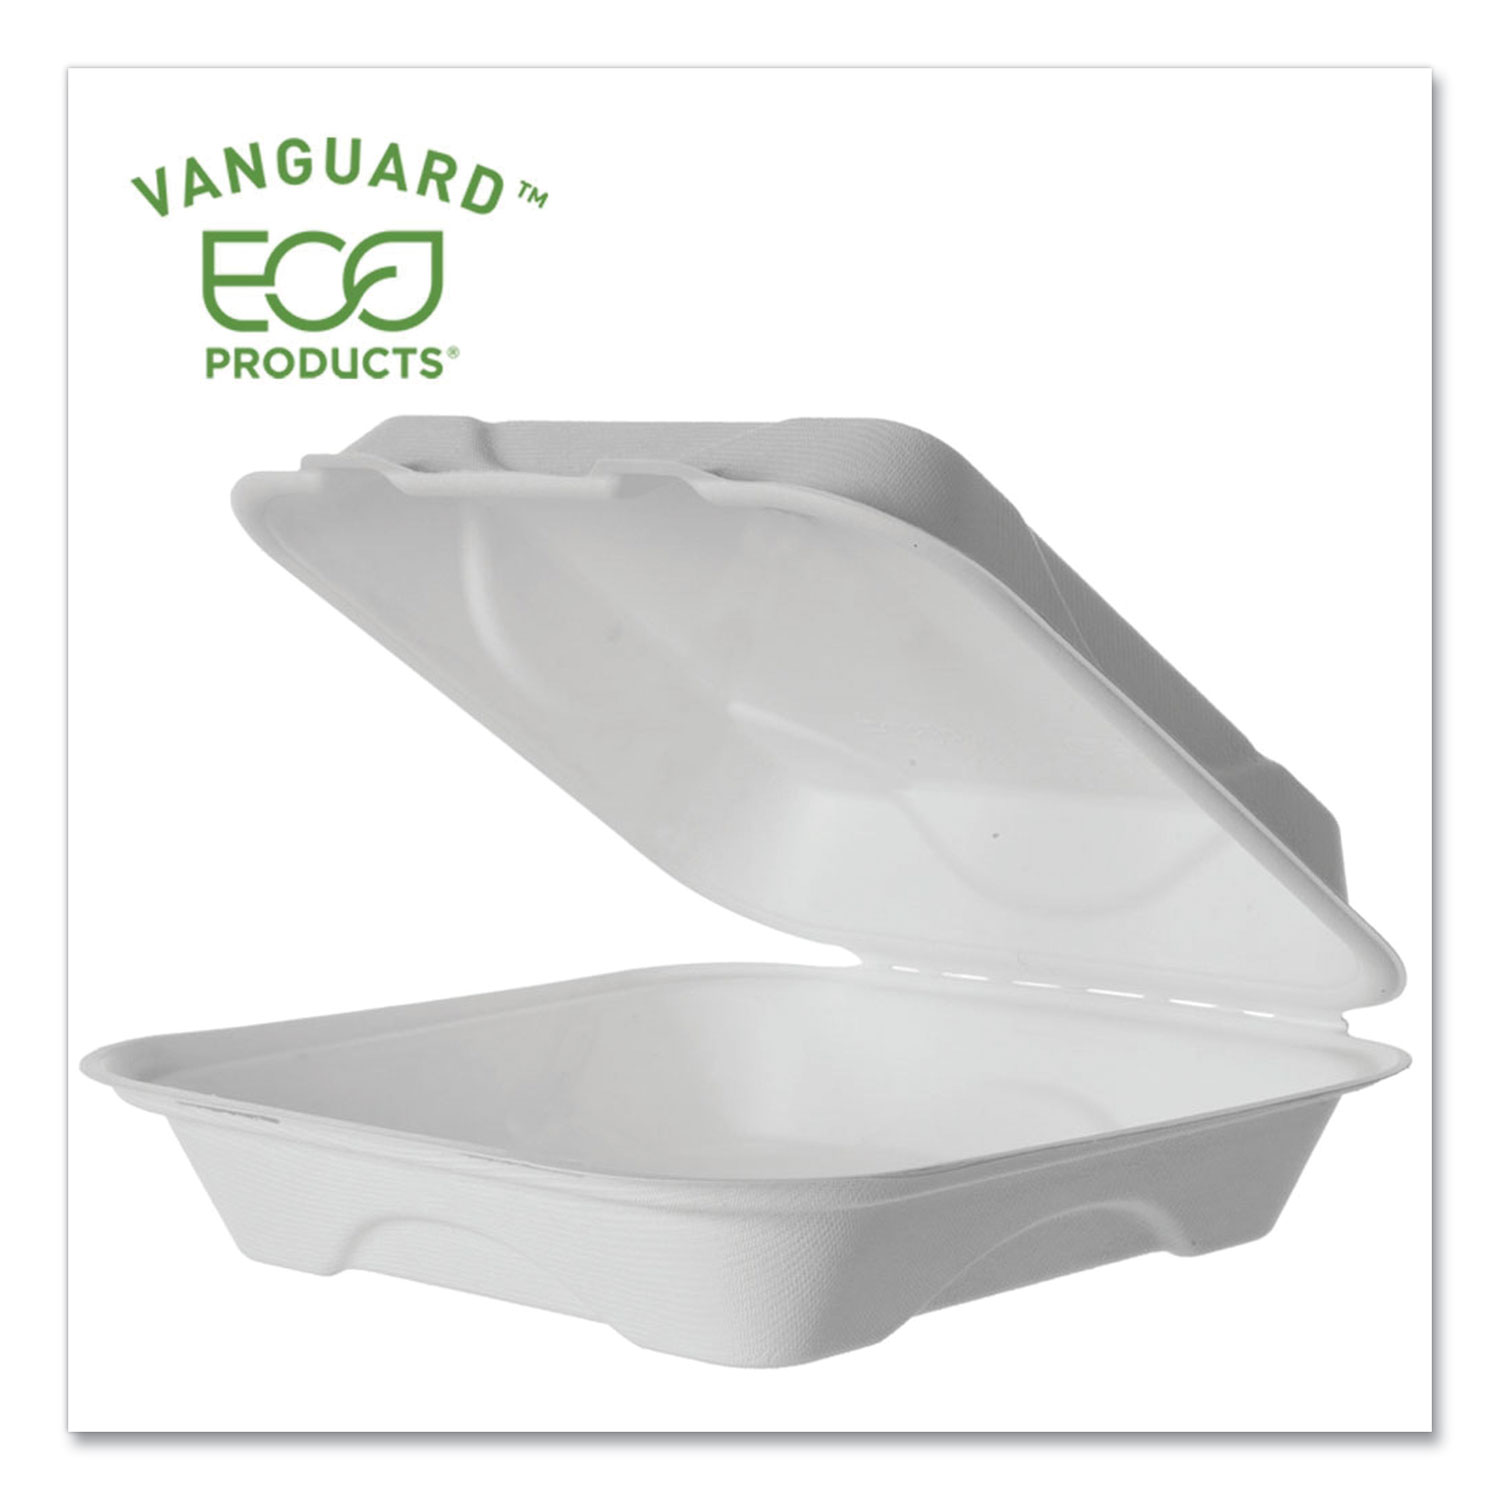  Eco-Products EP-HC91NFA Vanguard Renewable and Compostable Sugarcane Clamshells, 1-Compartment, 9 x 9 x 3, White, 200/Carton (ECOEPHC91NFA) 